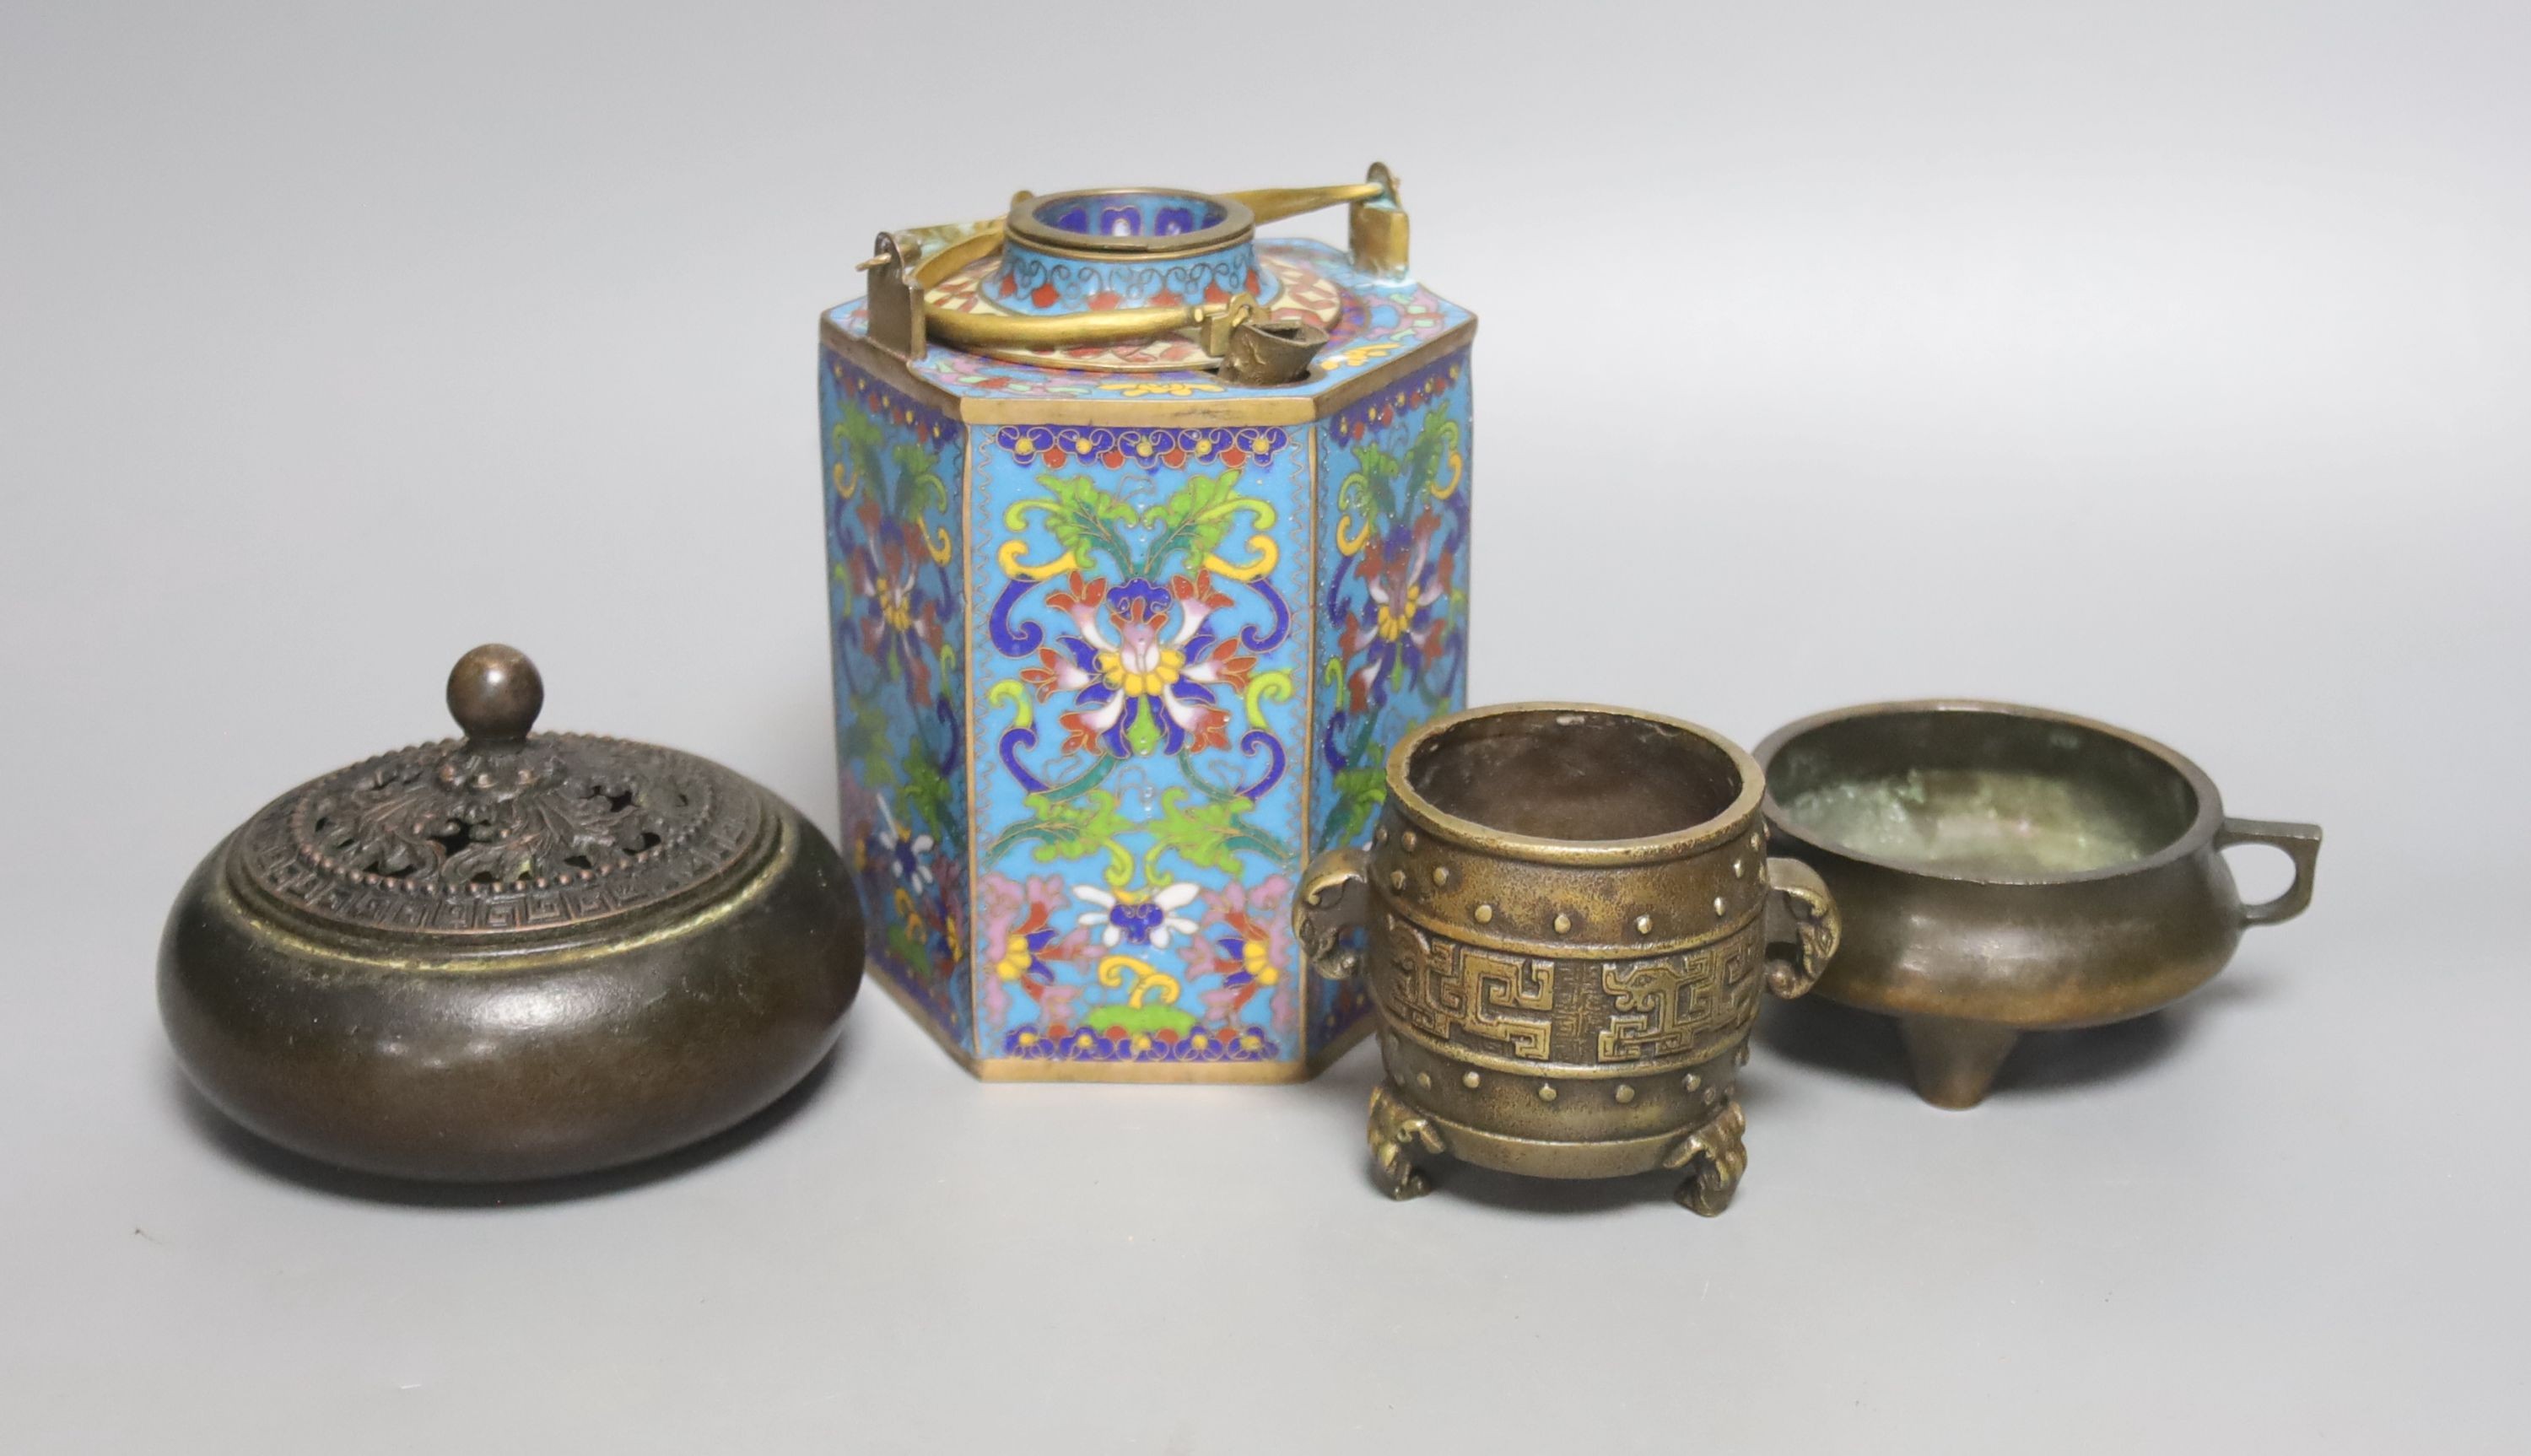 A Chinese small bronze tripod censer, a Chinese archaistic bronze tripod vessel, a bronze jar and